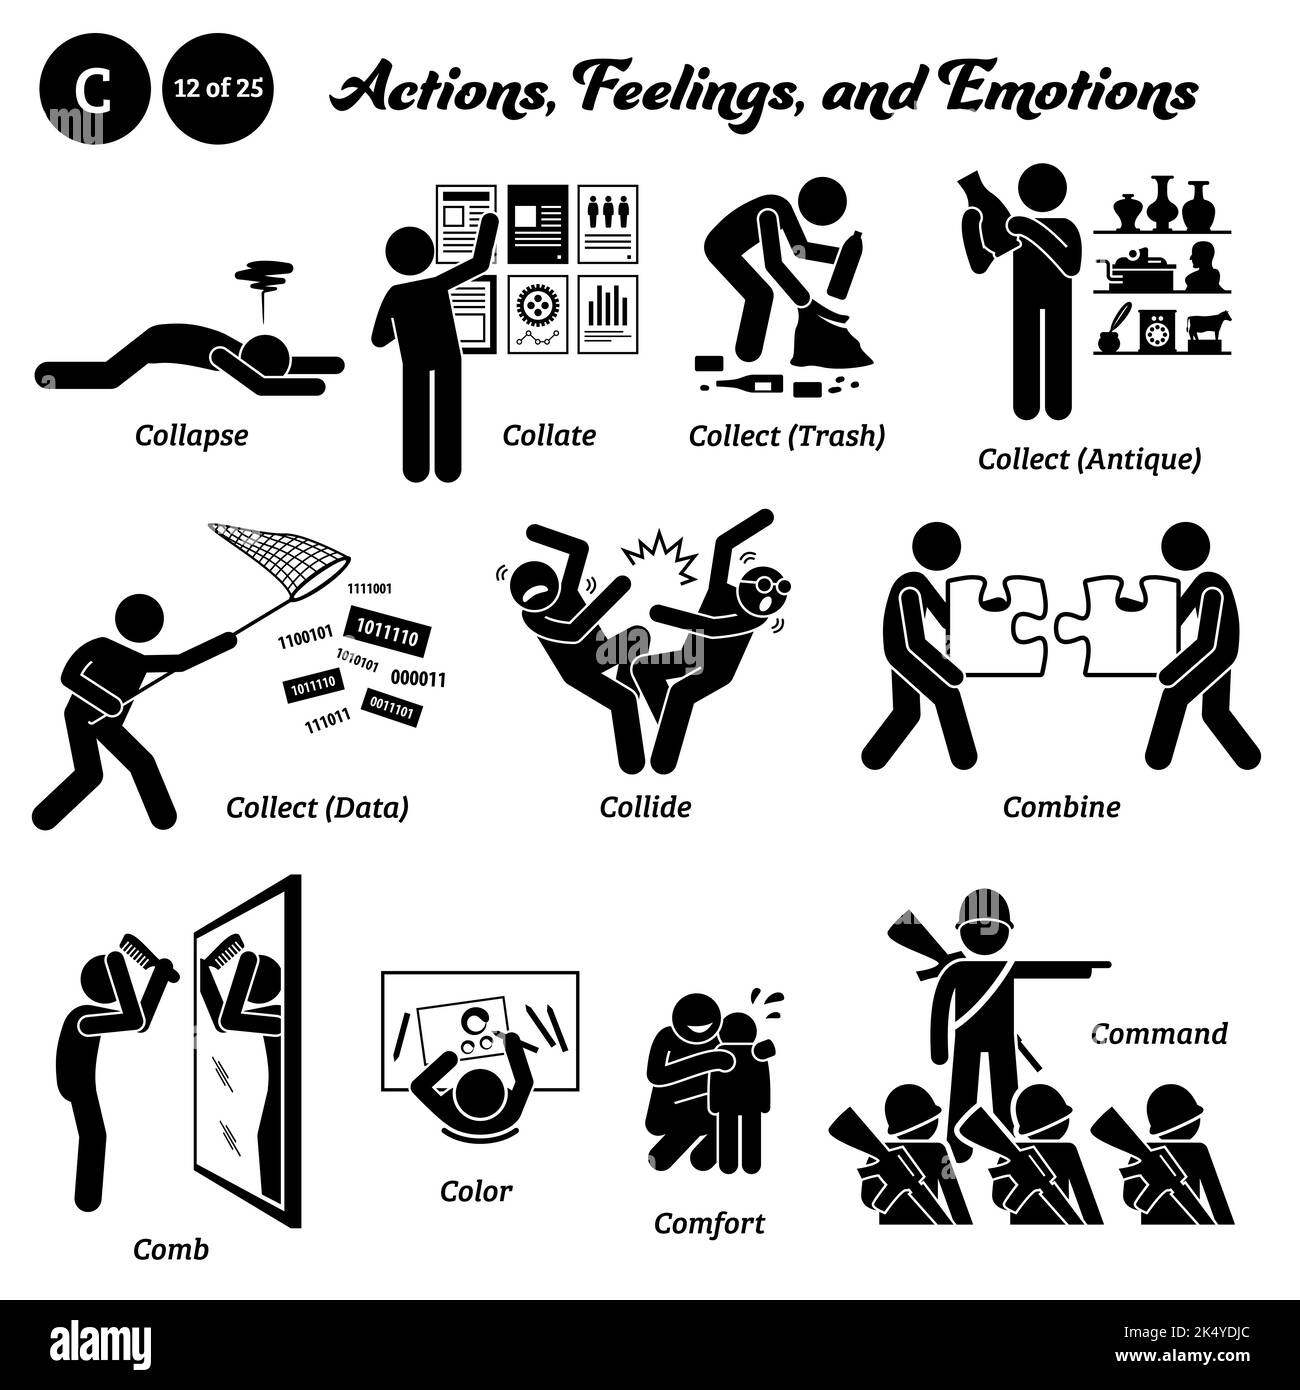 Stick figure human people man action, feelings, and emotions icons starting with alphabet C. Collapse, collate, collect trash, antique, data, collide, Stock Vector